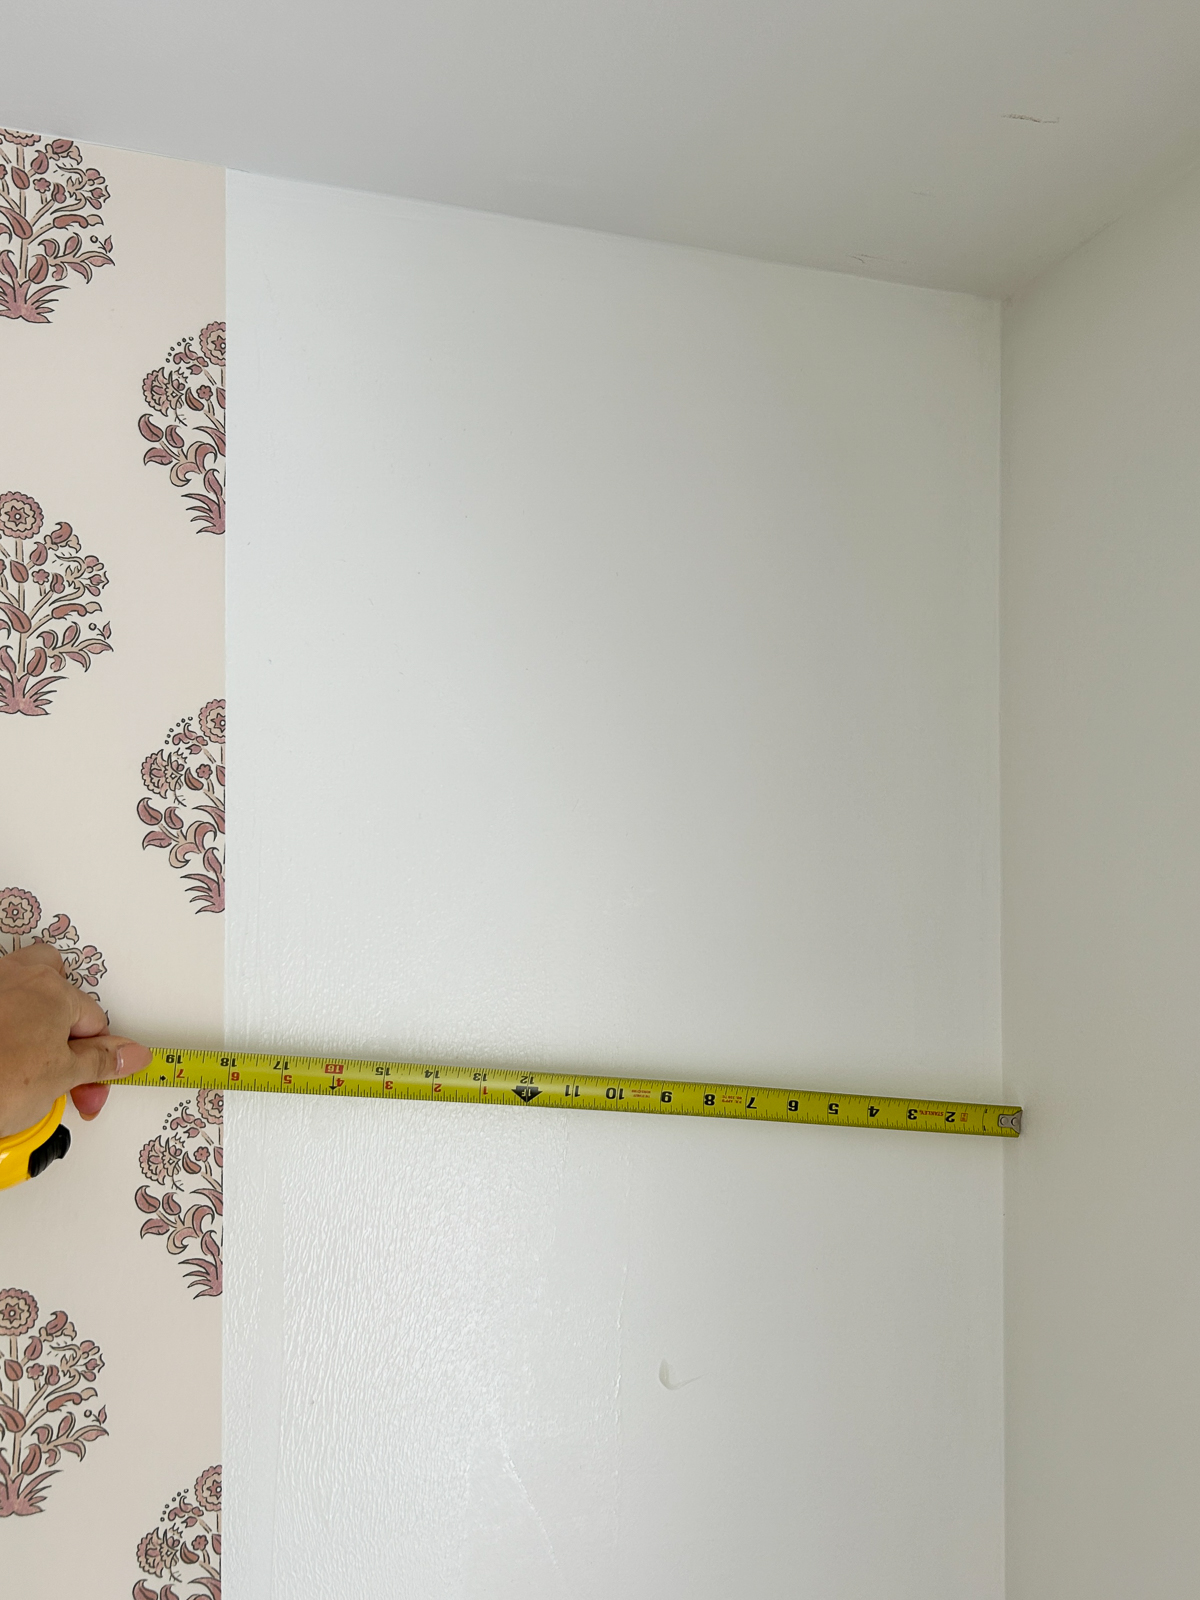 tape measure of distance from wallpaper to corner